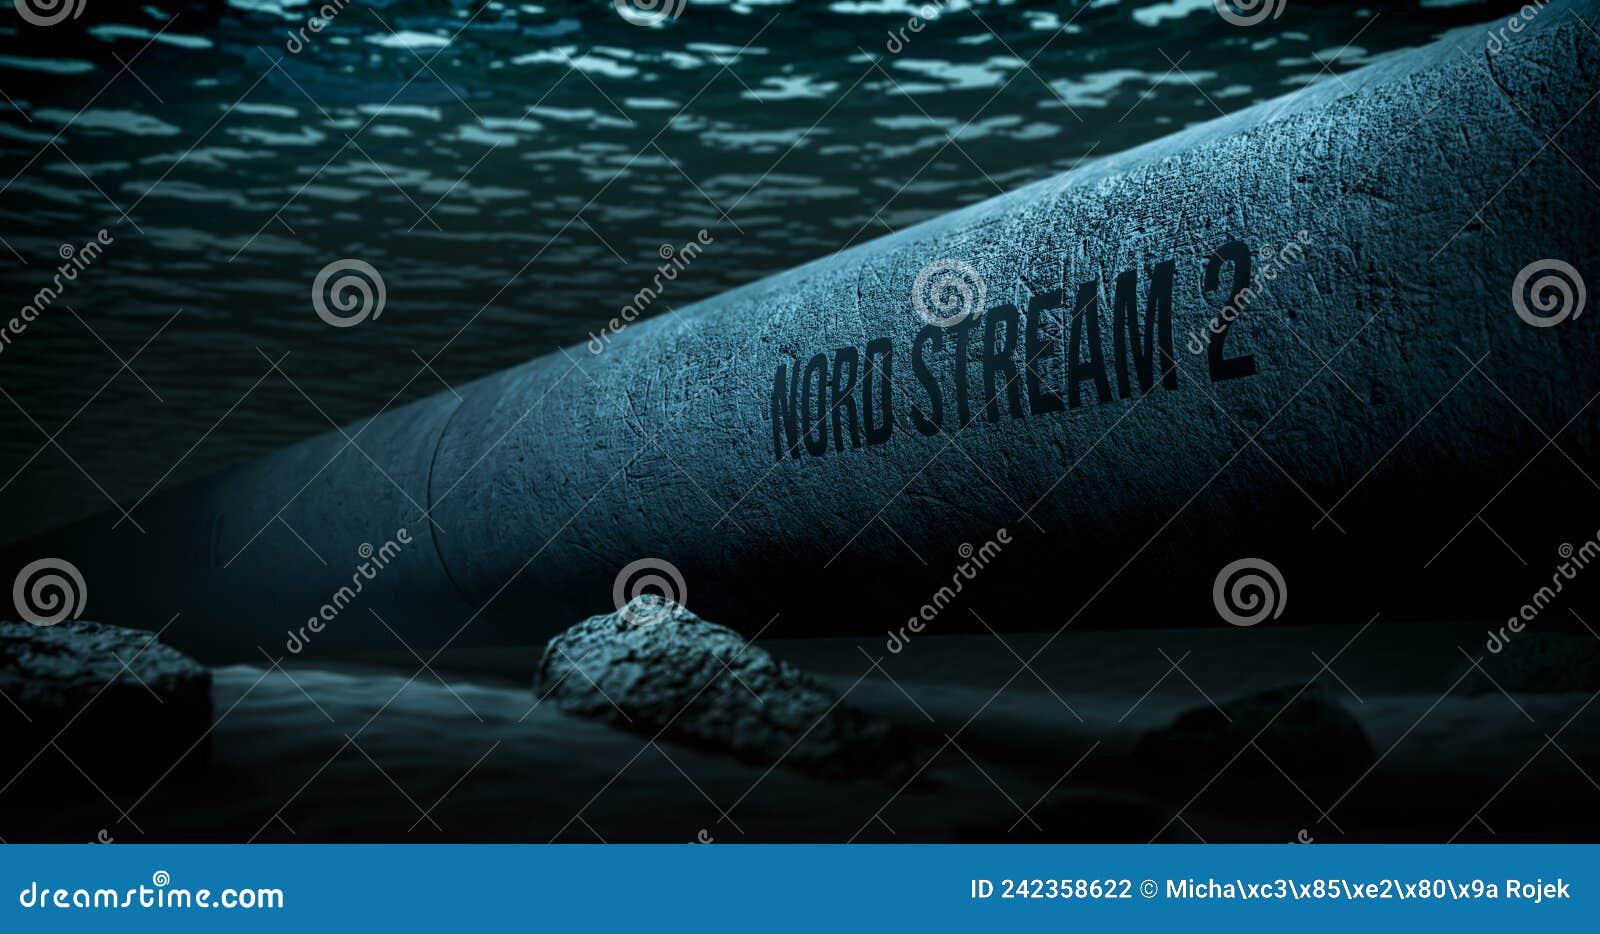 nord stream 2 underwater gas pipeline through the baltic sea, gas will be transported from russia to the internal gas market of